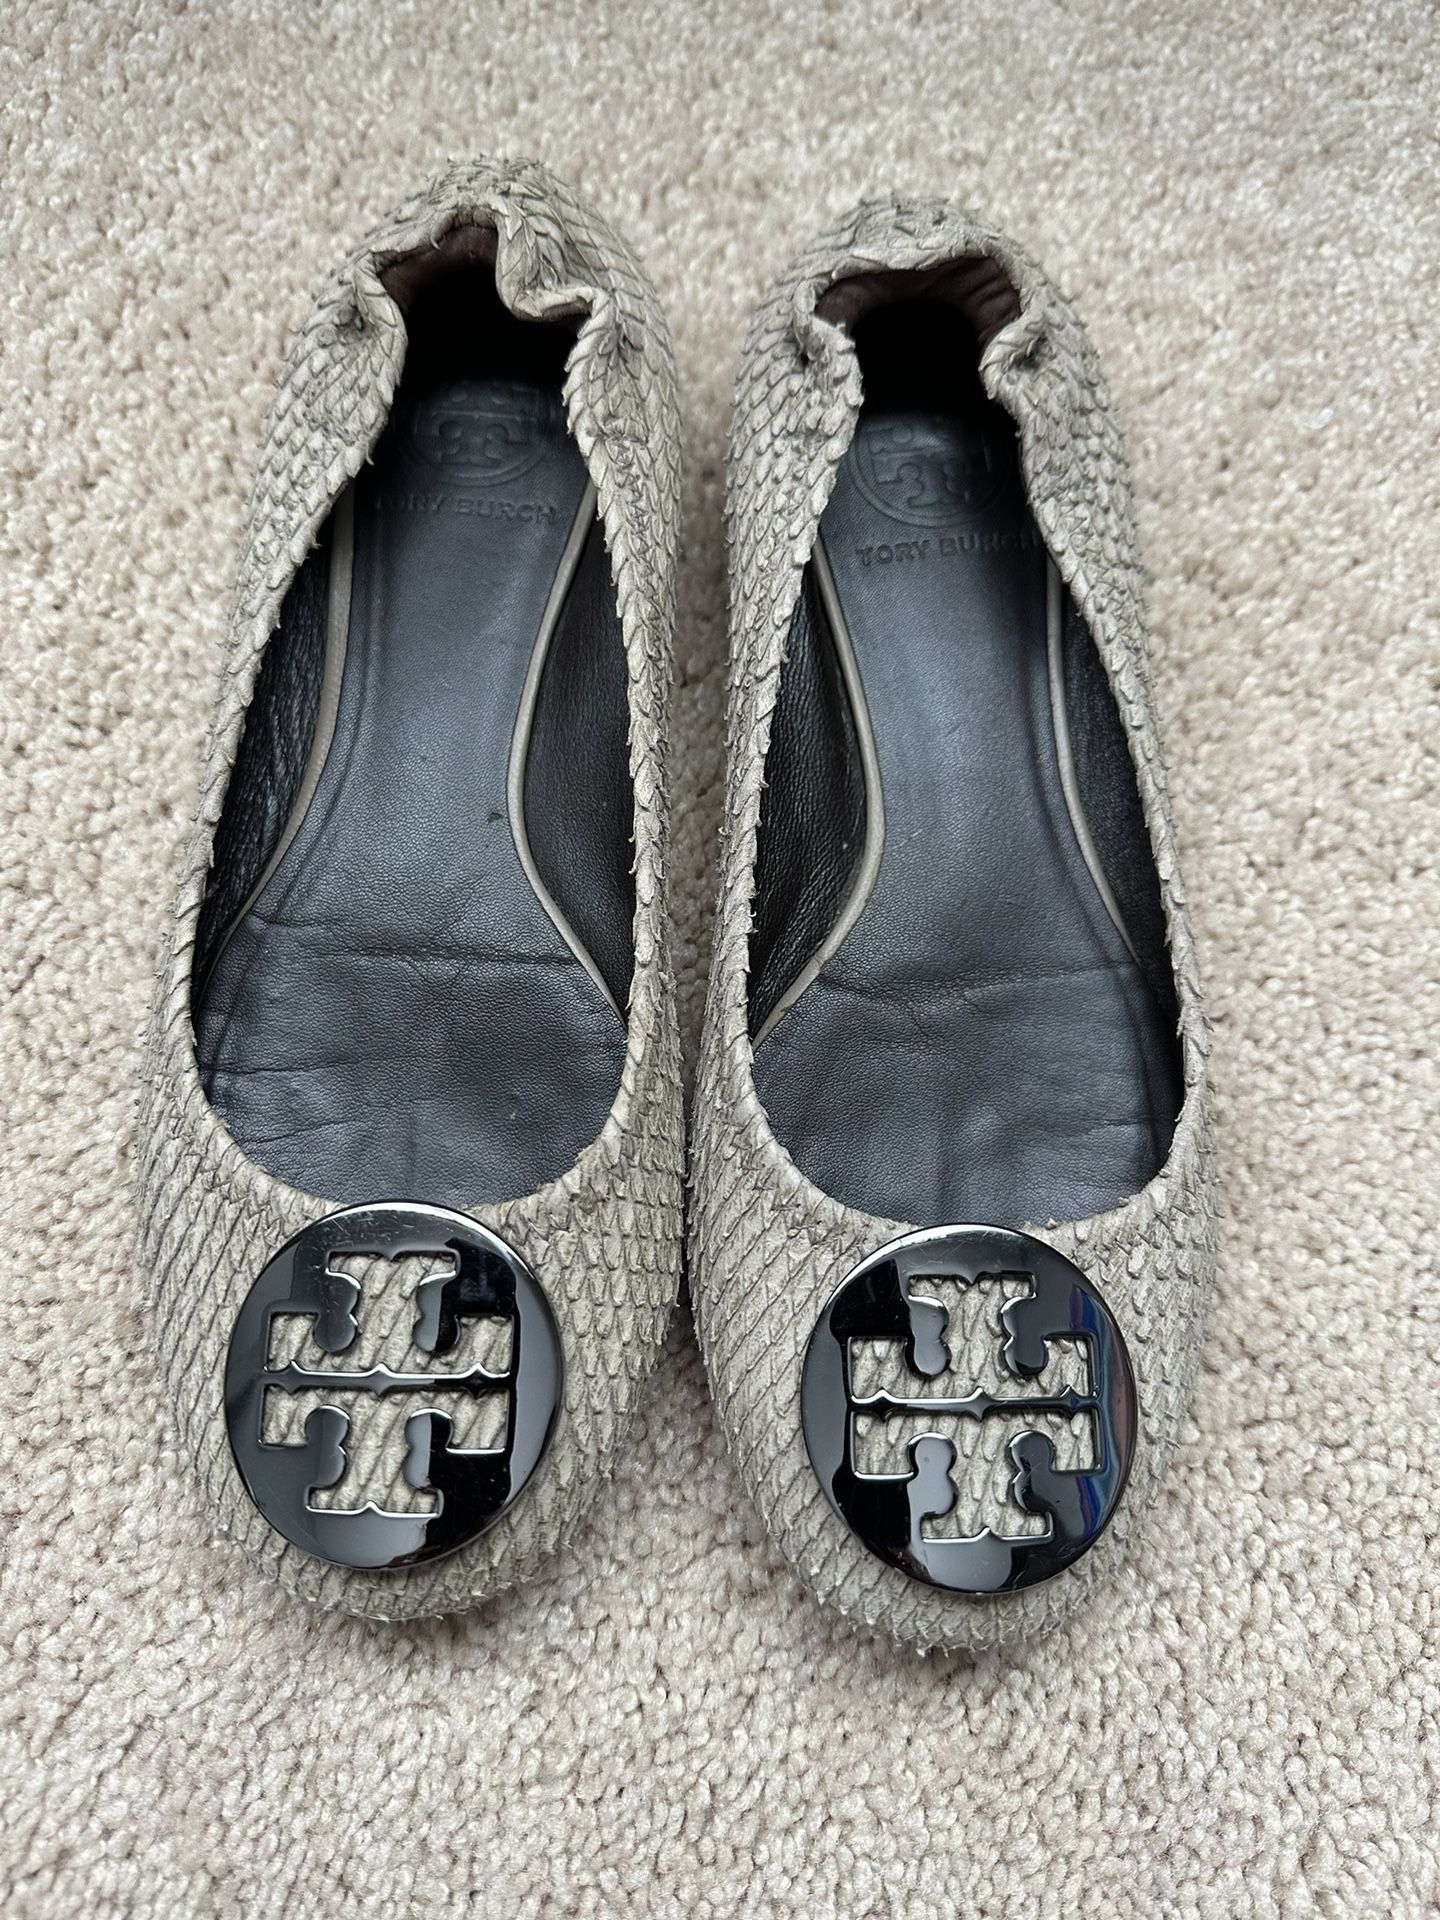 Tory Burch textured taupe flats in size  with gunmetal hardware for Sale  in Wayne, NJ - OfferUp